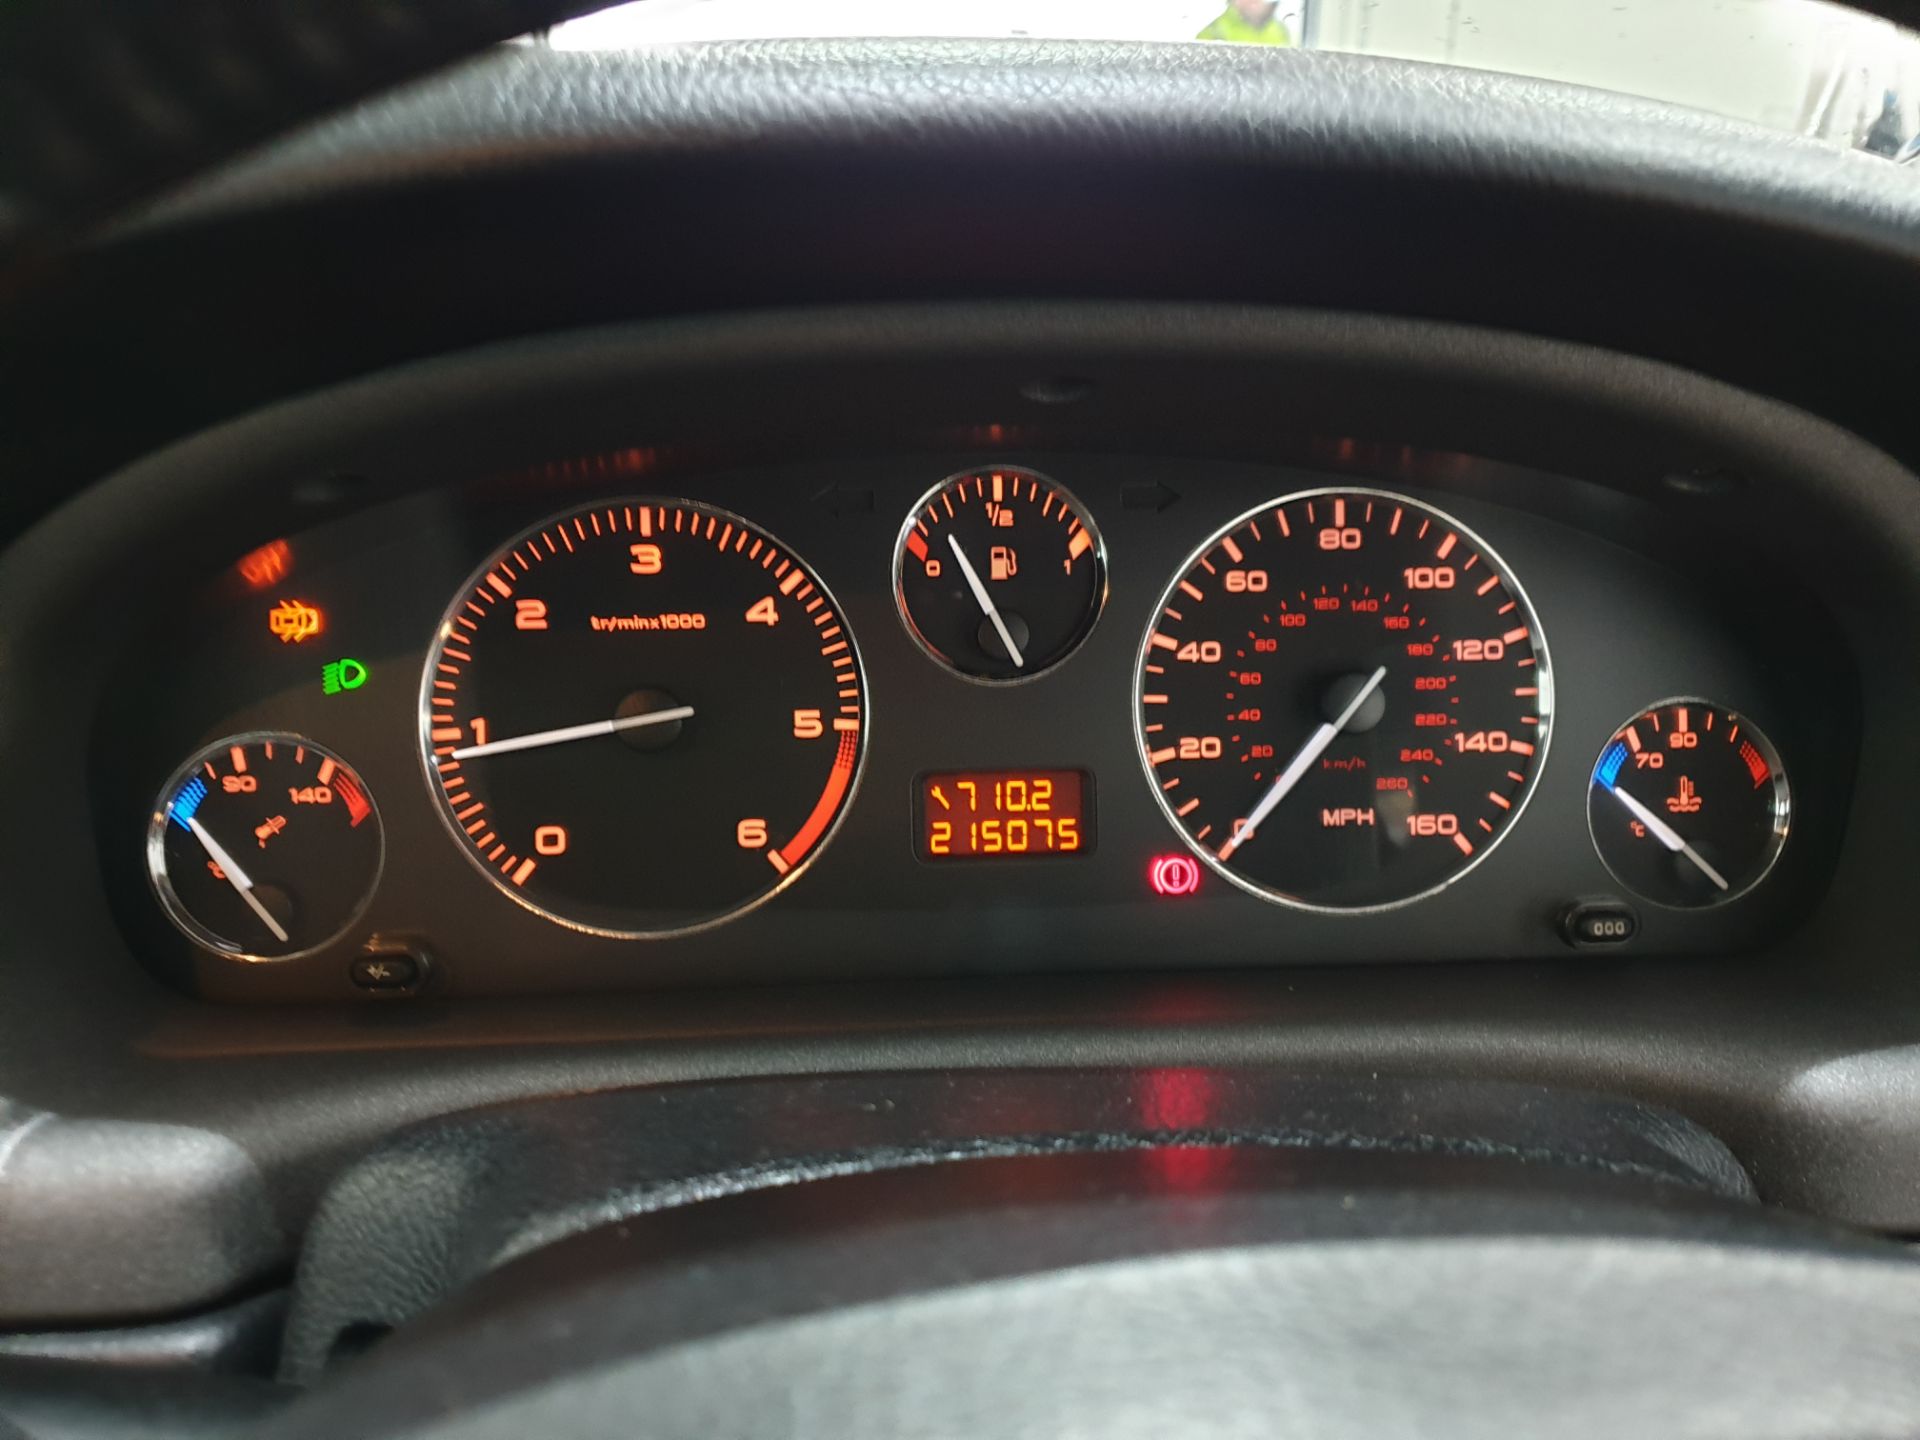 Peugeot 406 Coupe HDI, 2 owners, - Image 11 of 11